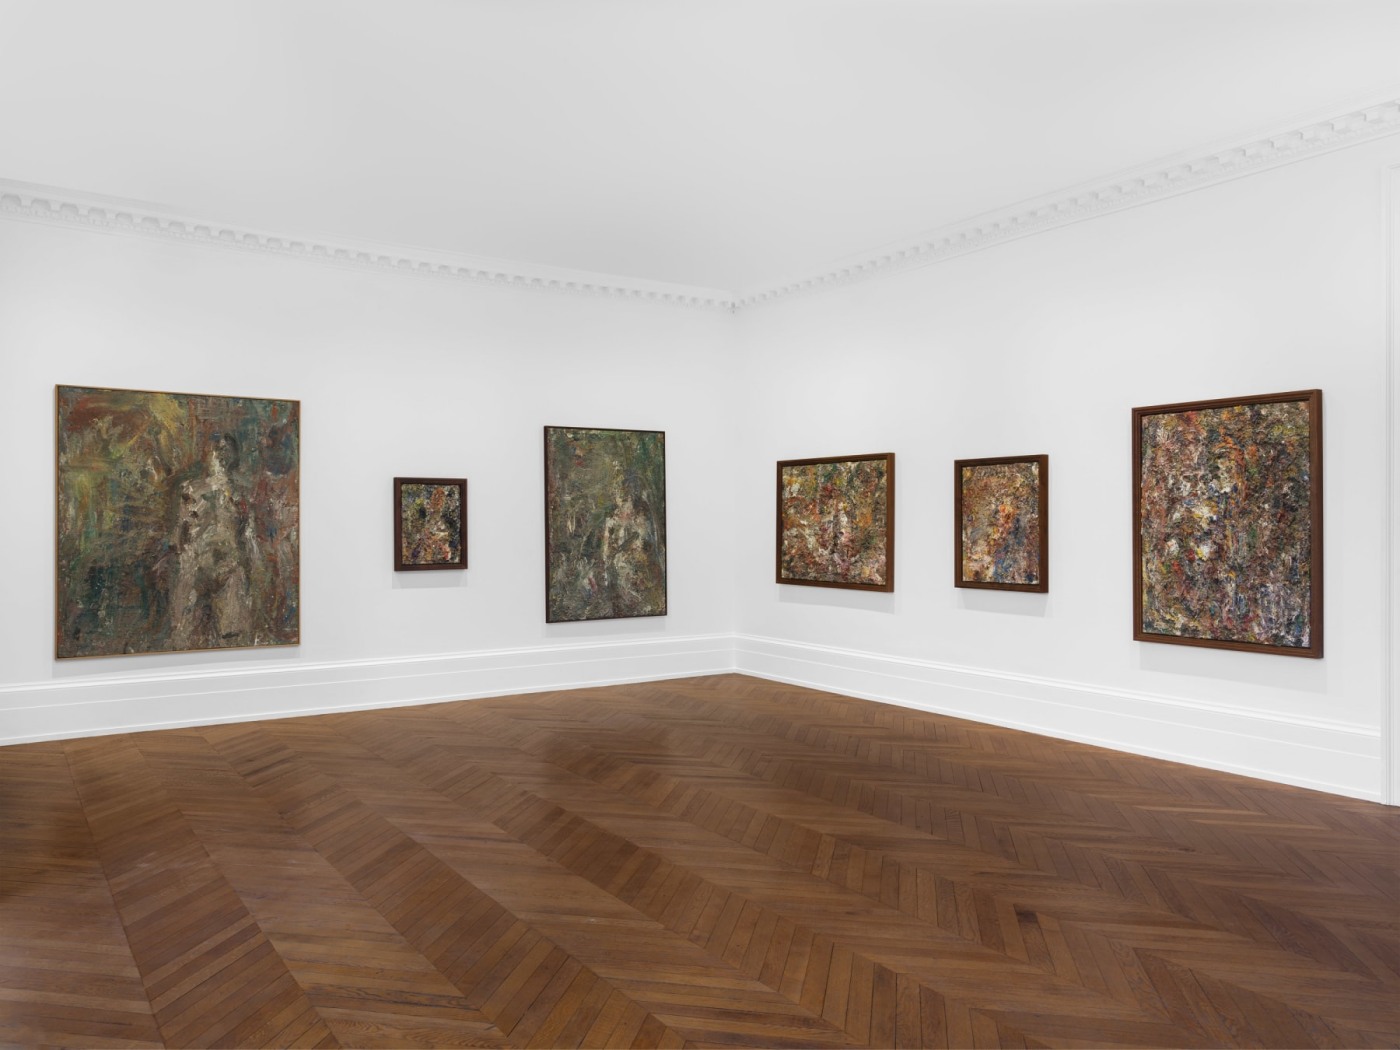 Installation image for Eugène Leroy: The Materiality of Light, Paintings 1950-1999, at Michael Werner Gallery